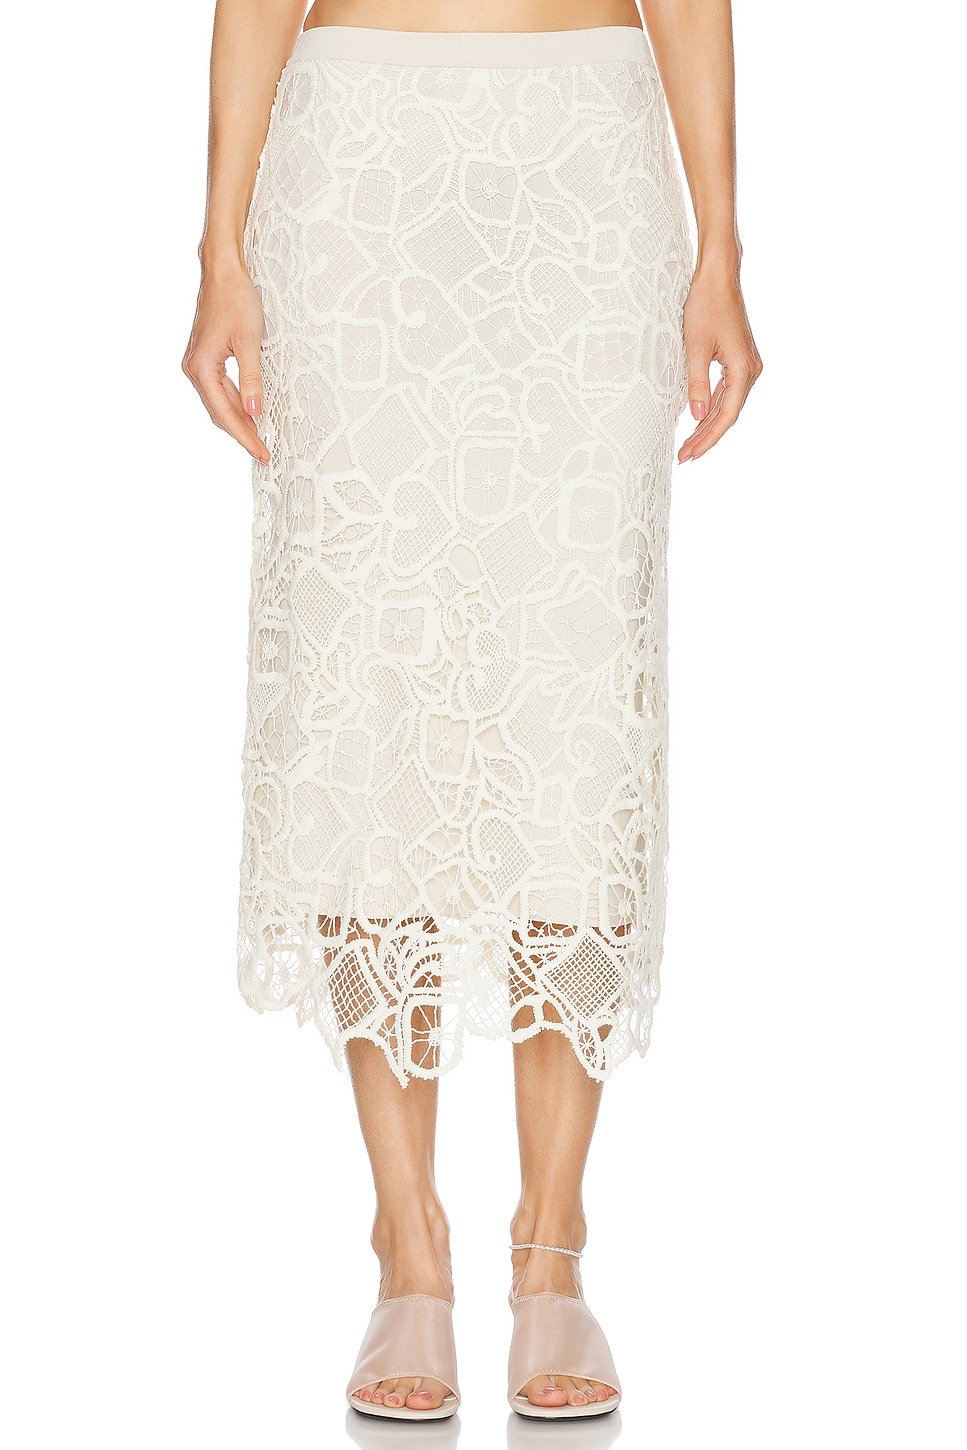 Image 1 of A.L.C. Shay Skirt in Warm White